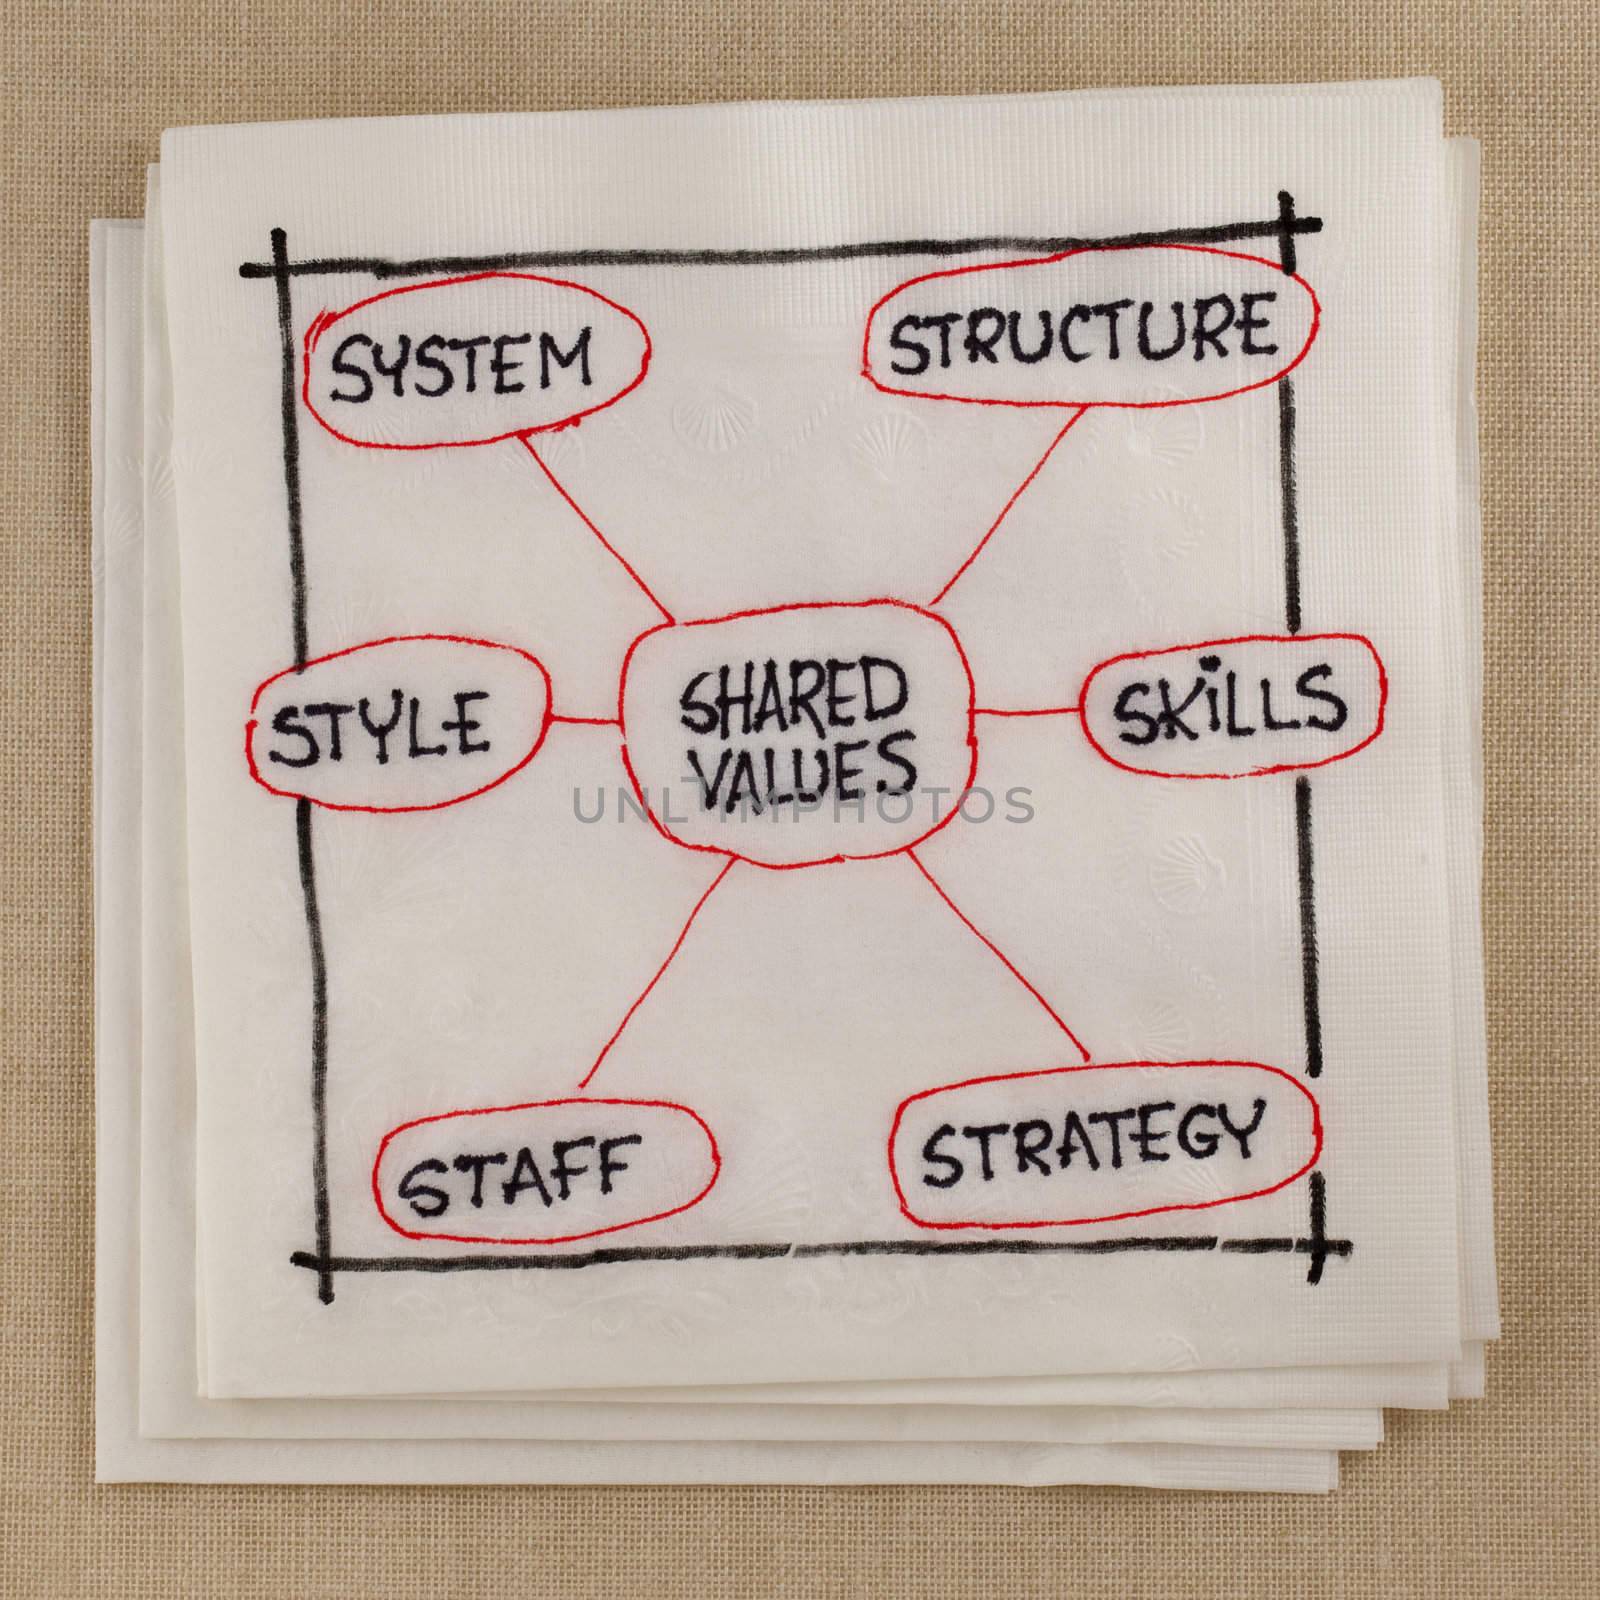 7S model for organizational culture, analysis and development (skills, staff, strategy, systems, structure, style, shared values) - napkin sketch